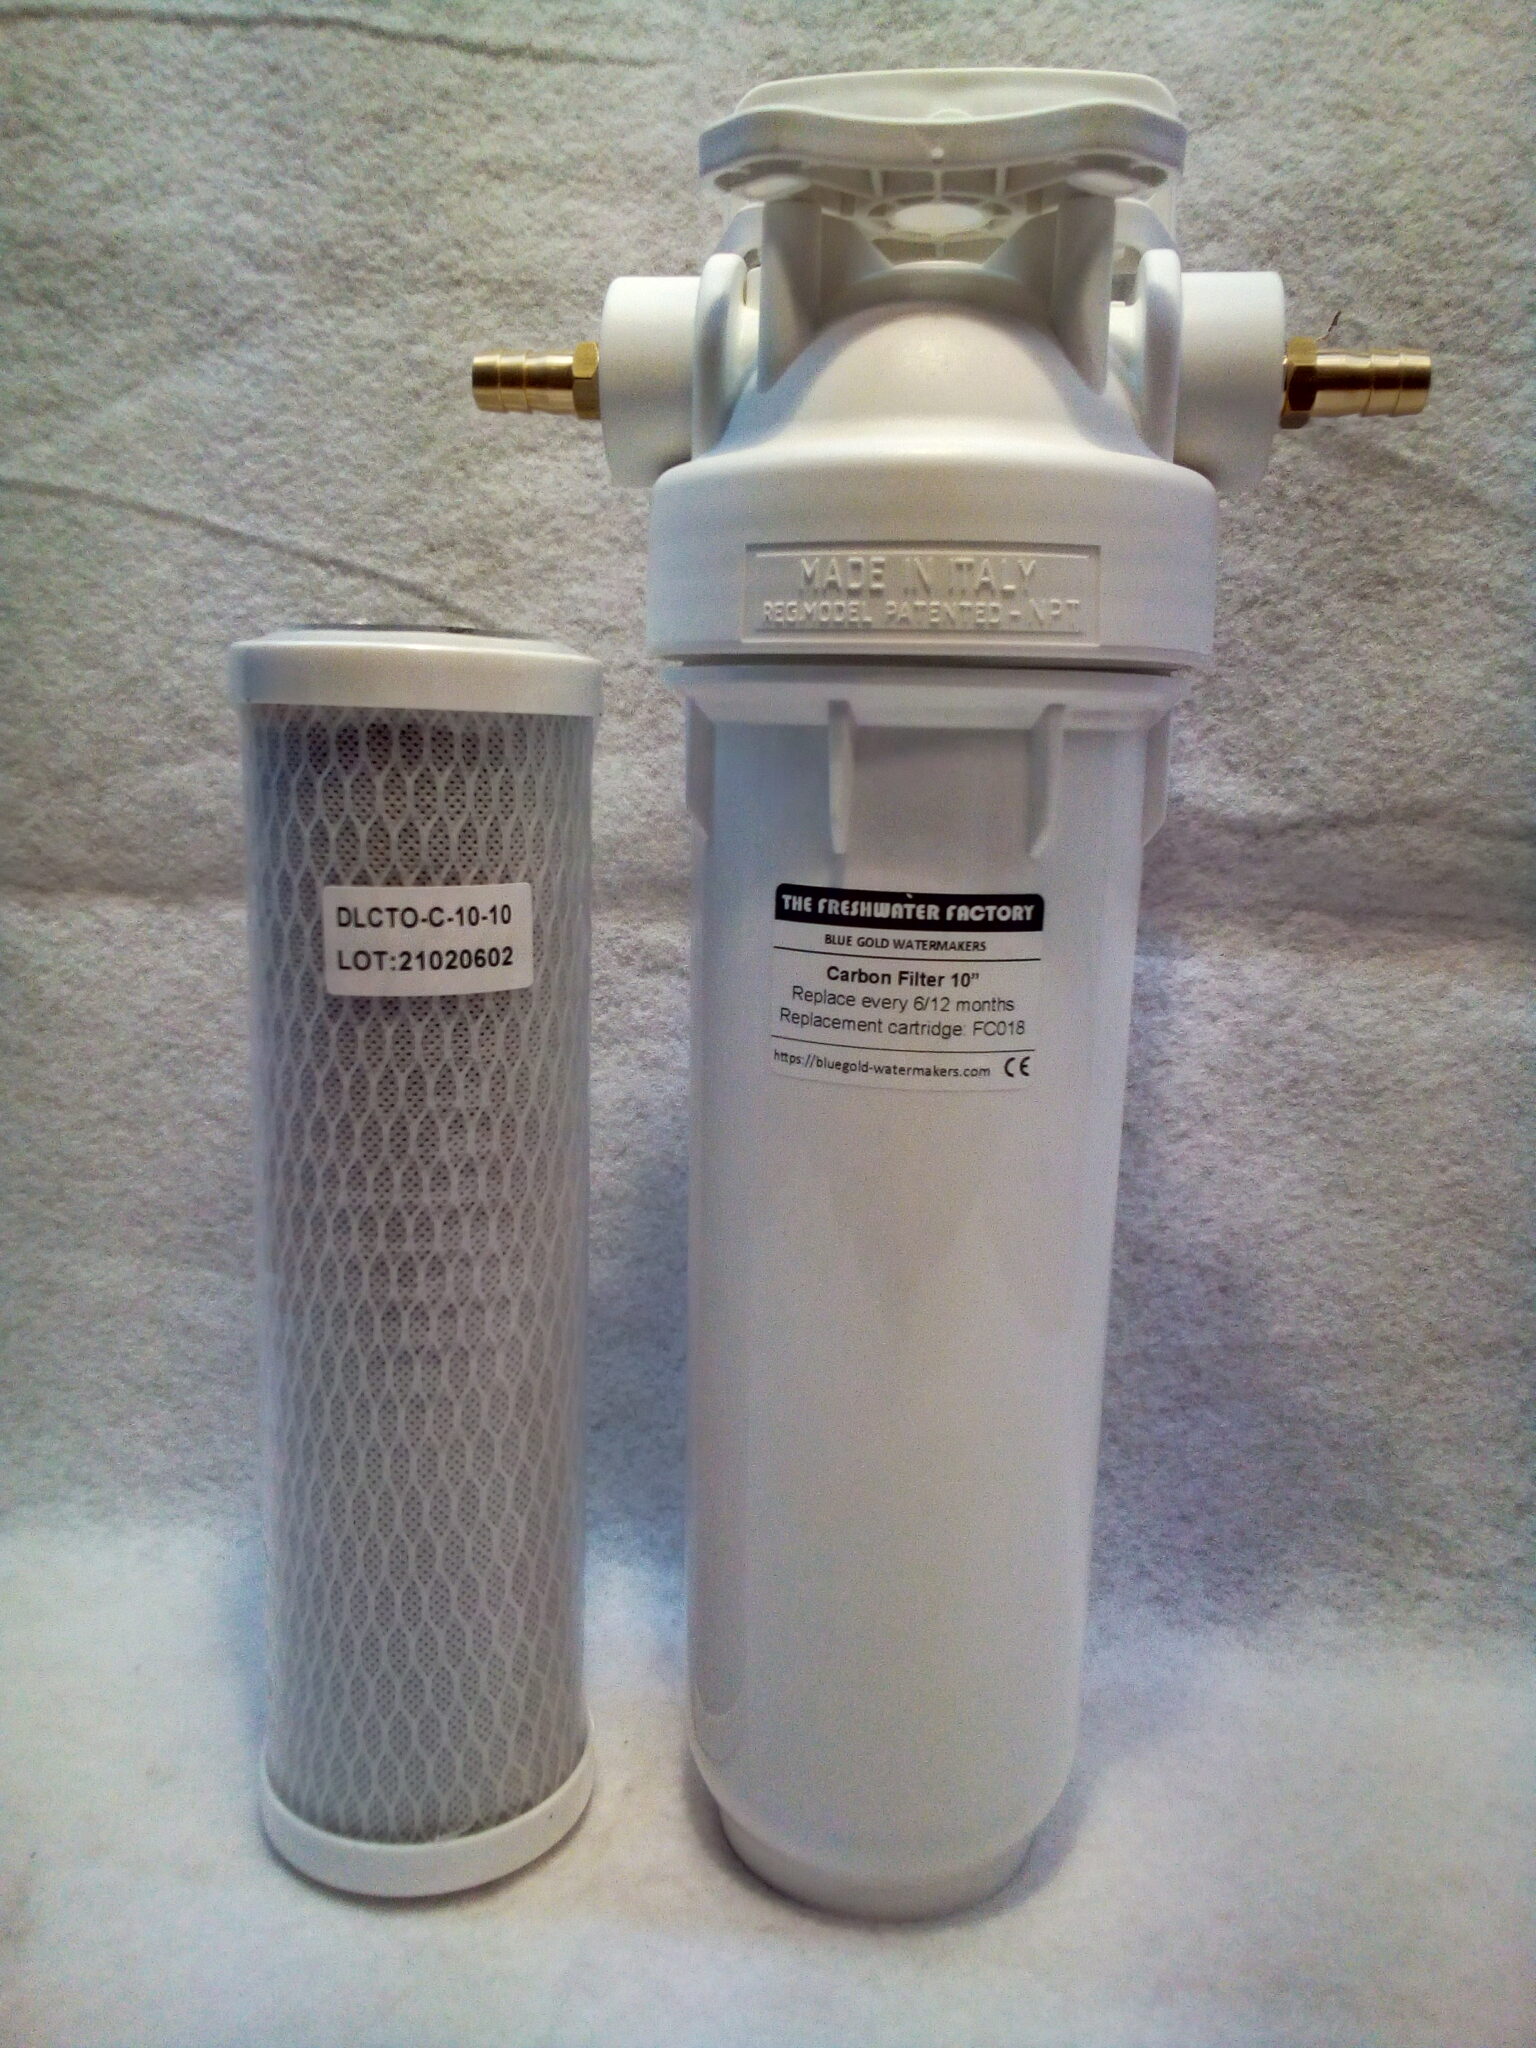 Carbonblock%20filter%20for%20watermaker 1 - Carbonblock filter assembly for chlorine removal with DOE 10” cartridge